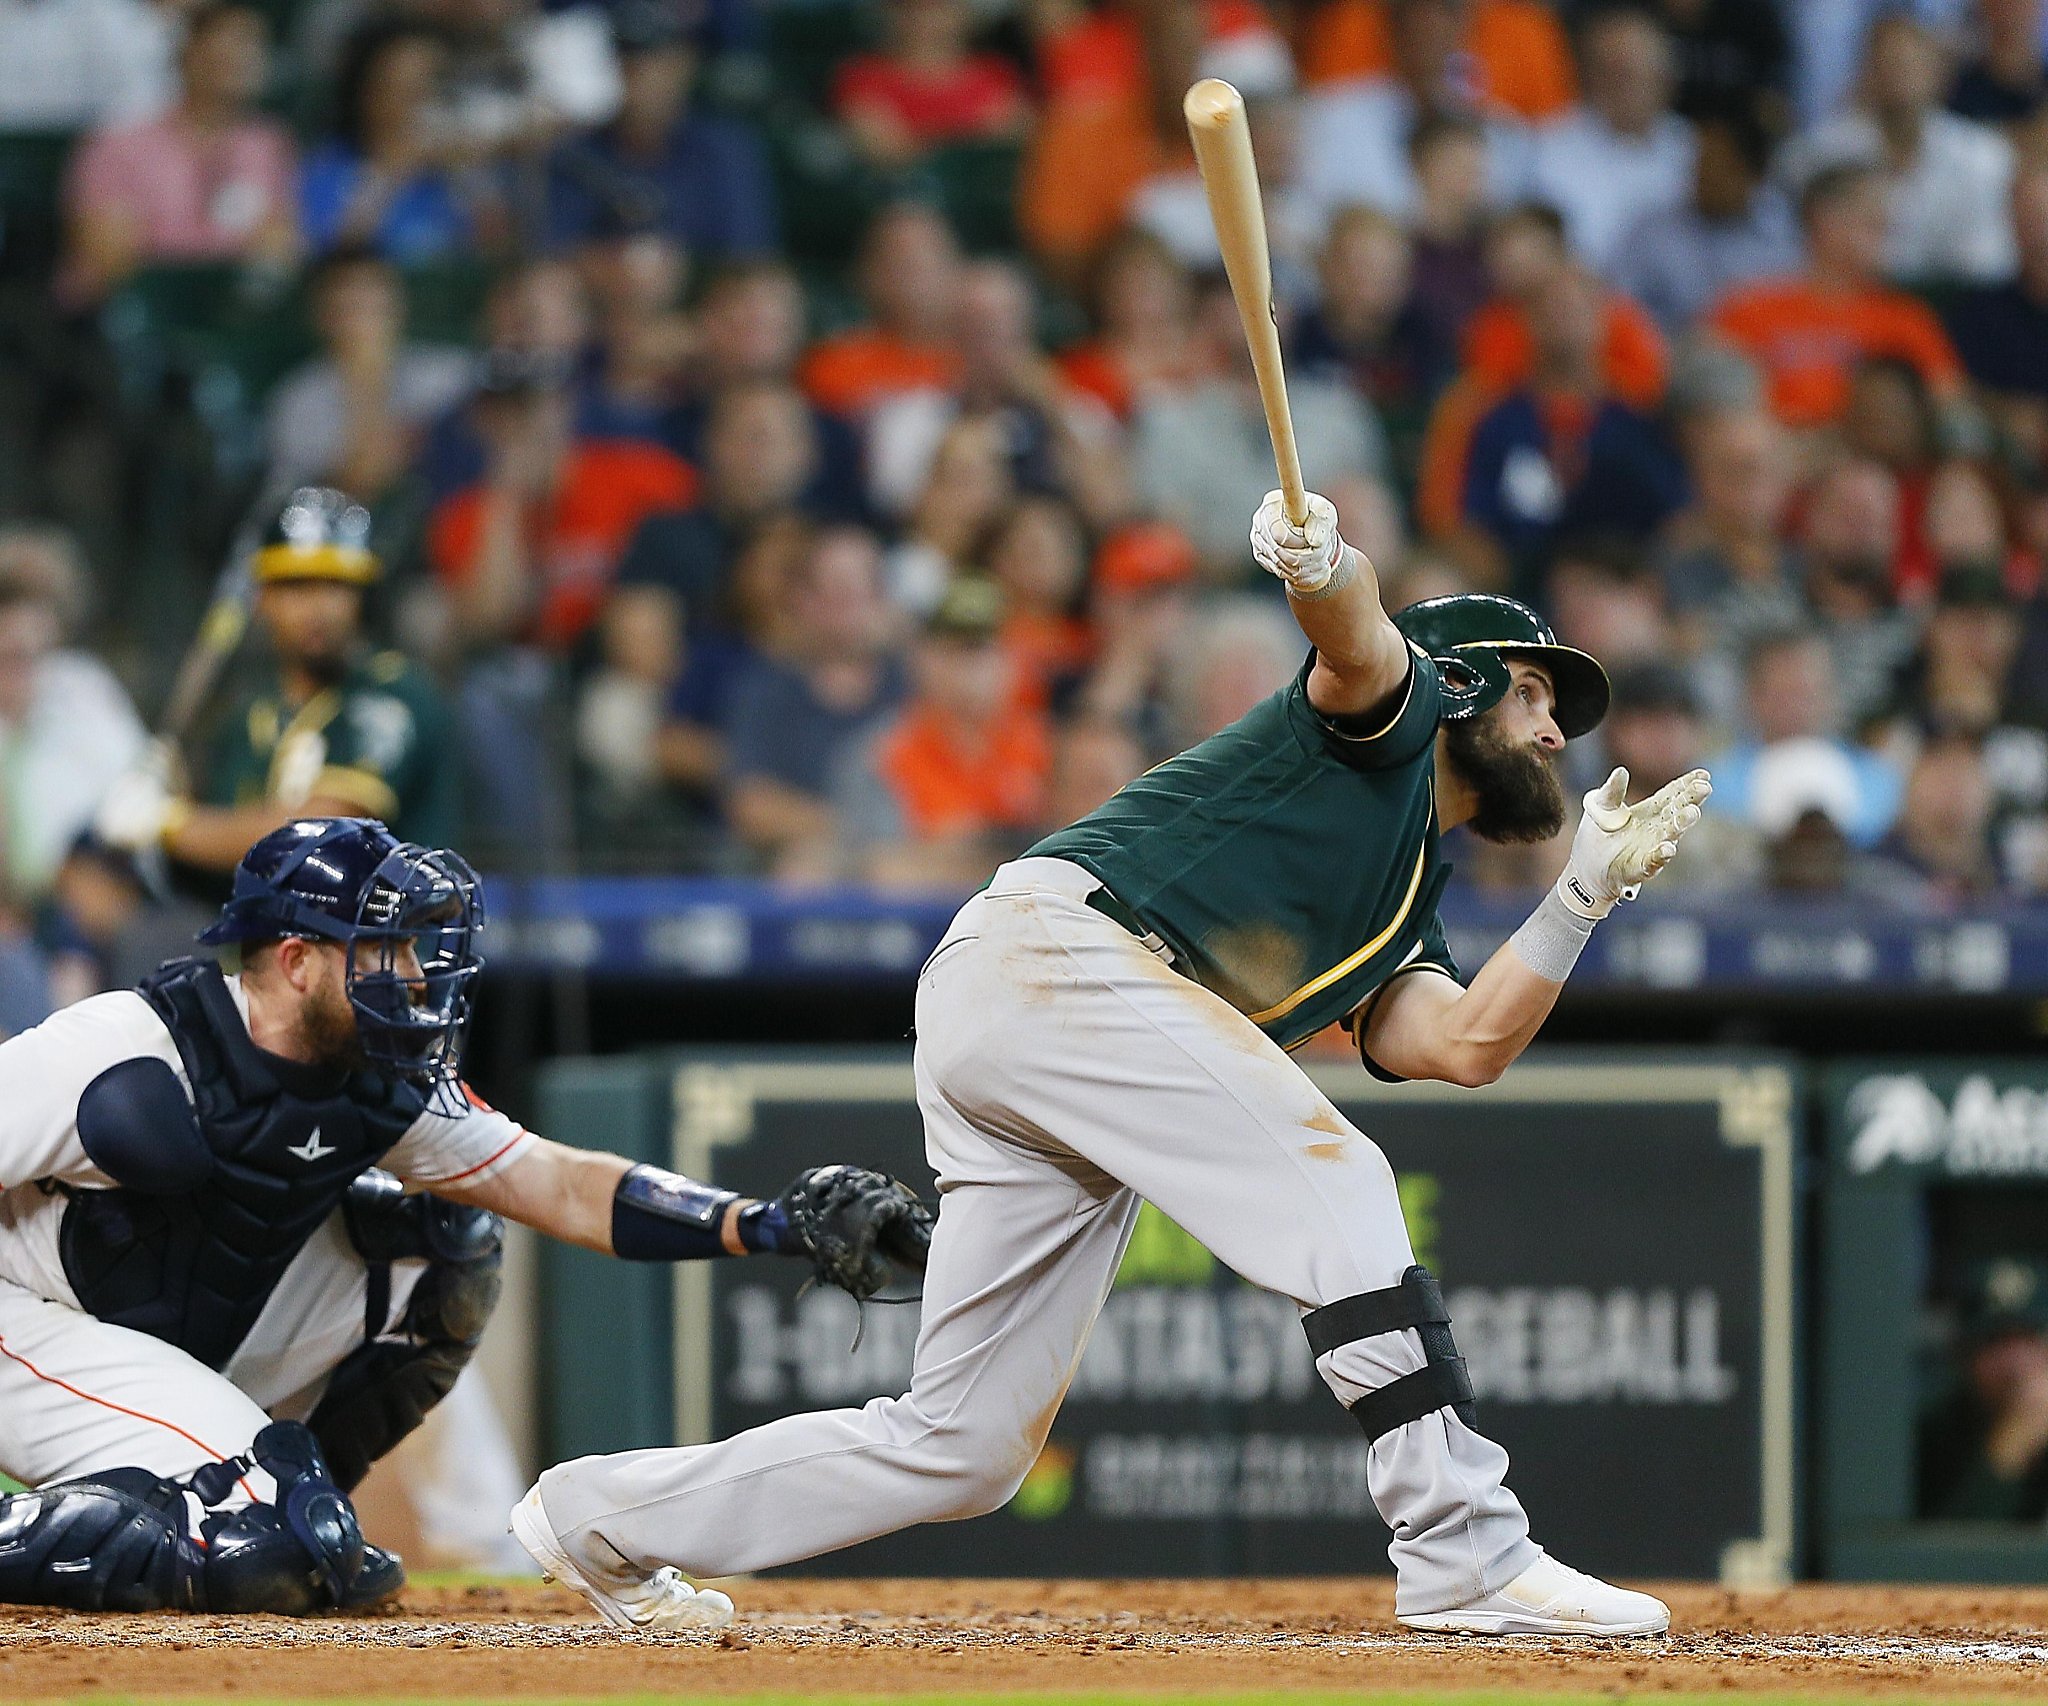 Nick Martini enjoying first big-league action with A’s - SFGate2048 x 1706